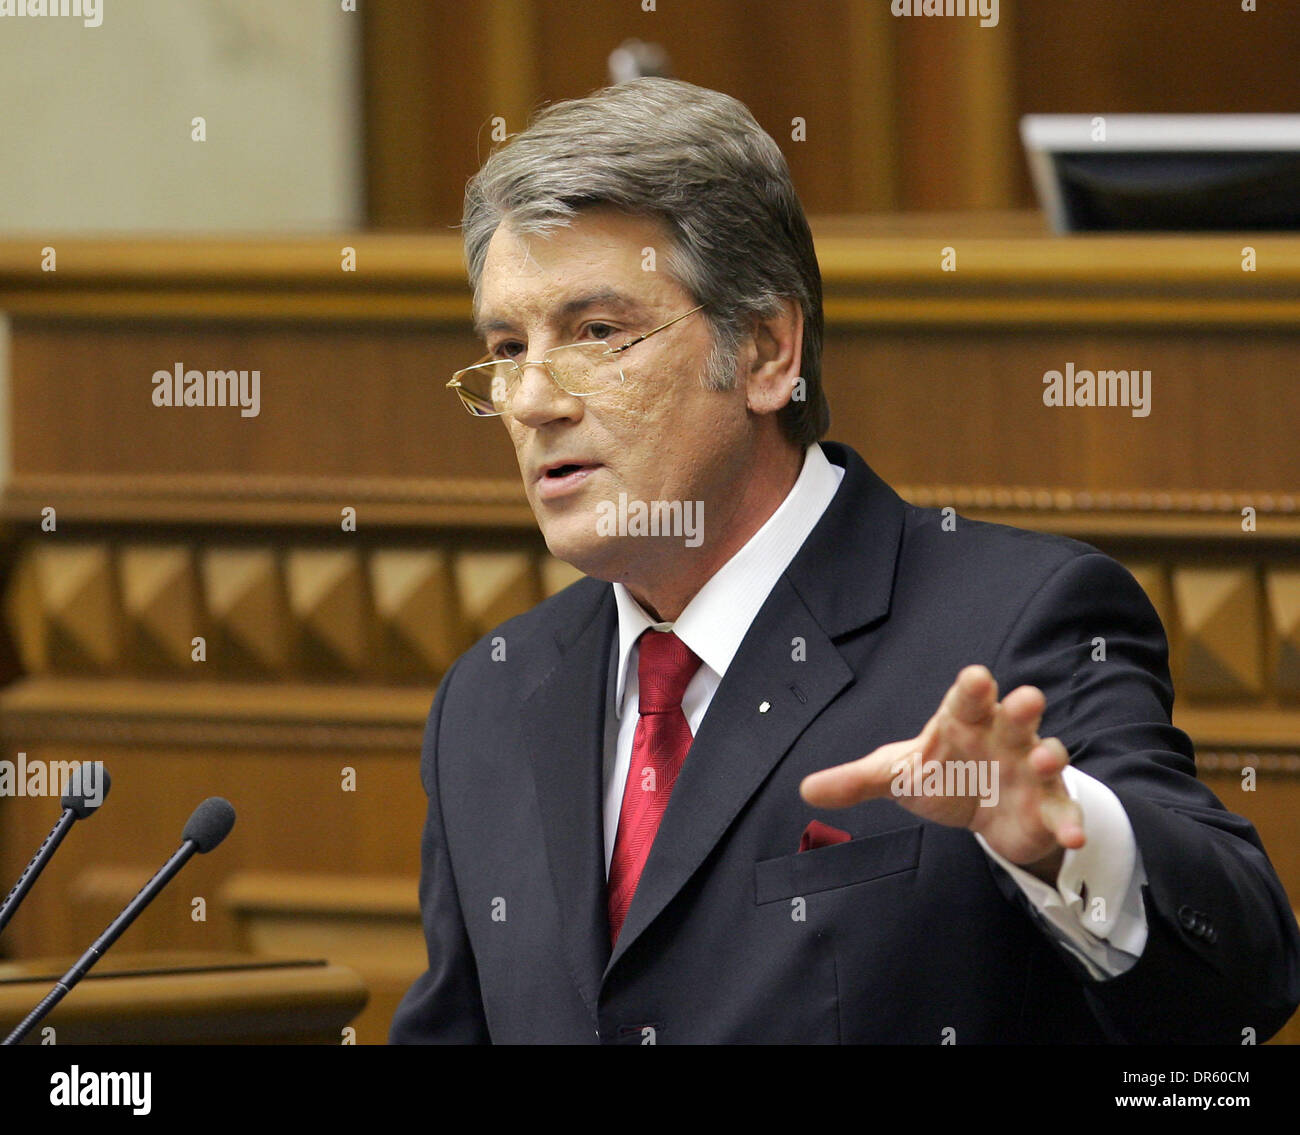 Mar 31, 2009 - Kiev, Ukraine - Ukrainian President VIKTOR YUSHCHENKO during the annual Presidential address in Parliament. (Credit Image: © PhotoXpress/ZUMA Press) RESTRICTIONS: * North and South America Rights Only * Stock Photo